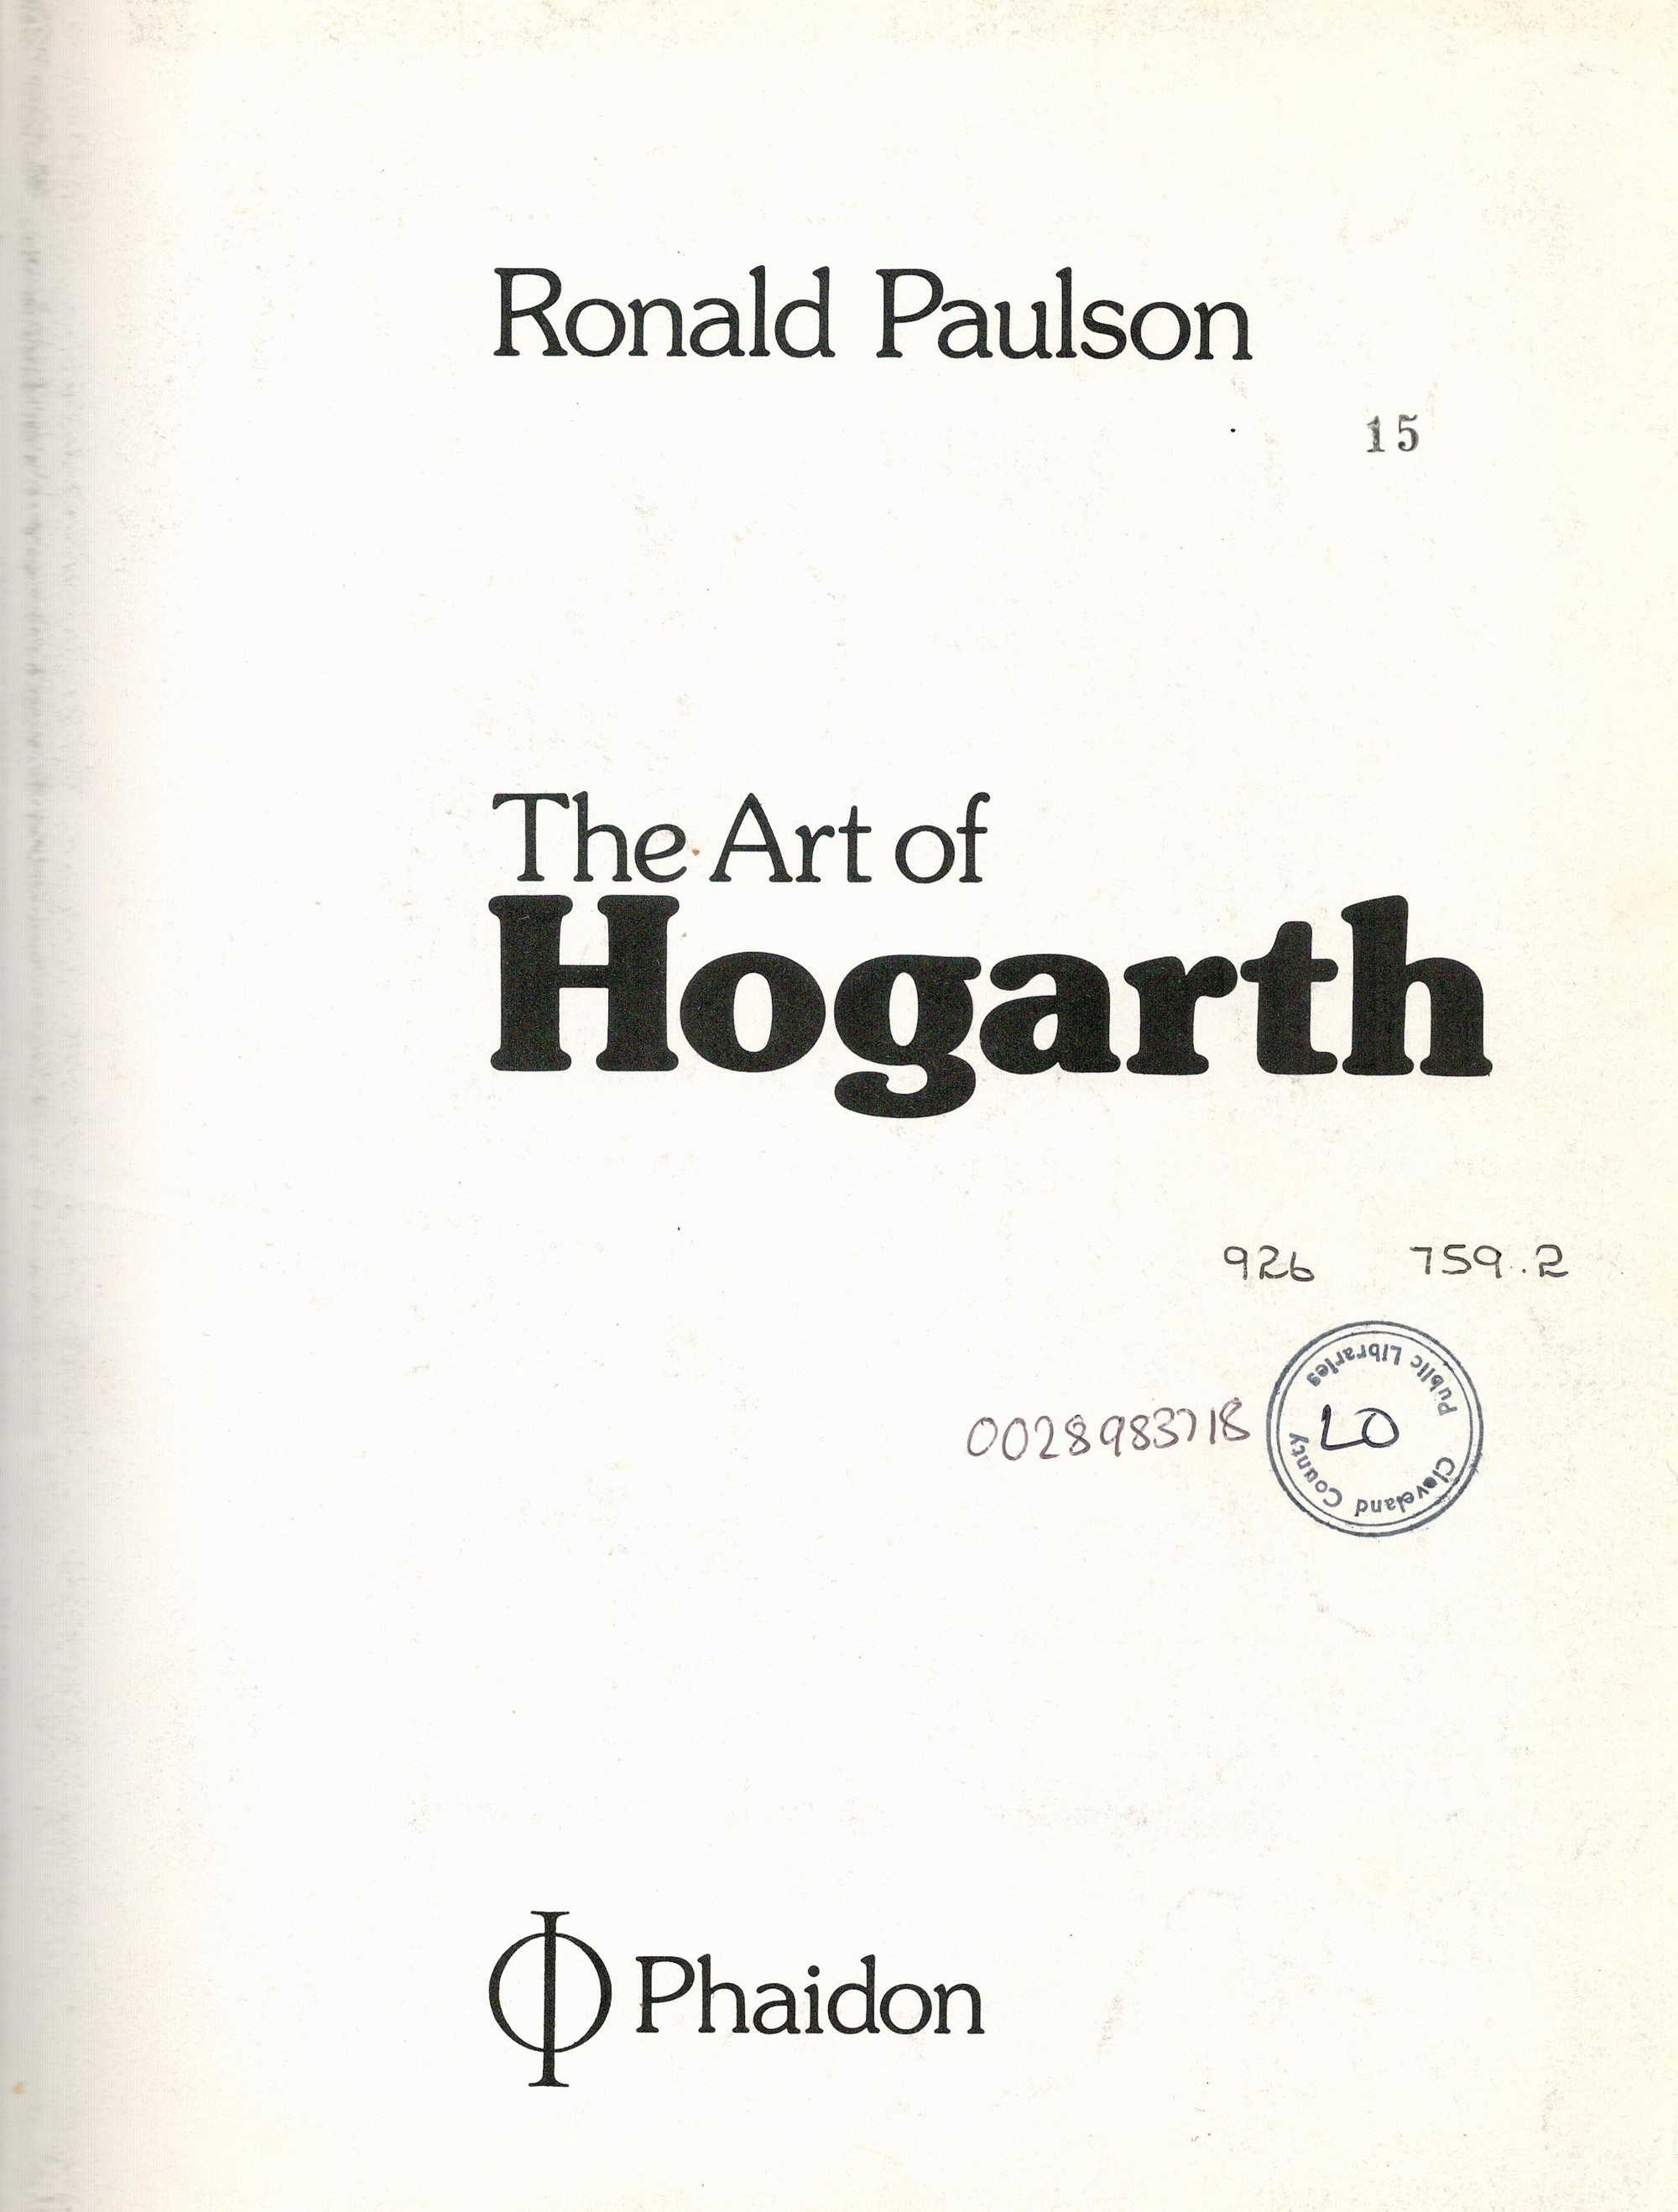 The Art of Hogarth by Ronald Paulson First Edition 1975 Hardback Book published by Phaidon Press Ltd - Image 3 of 6